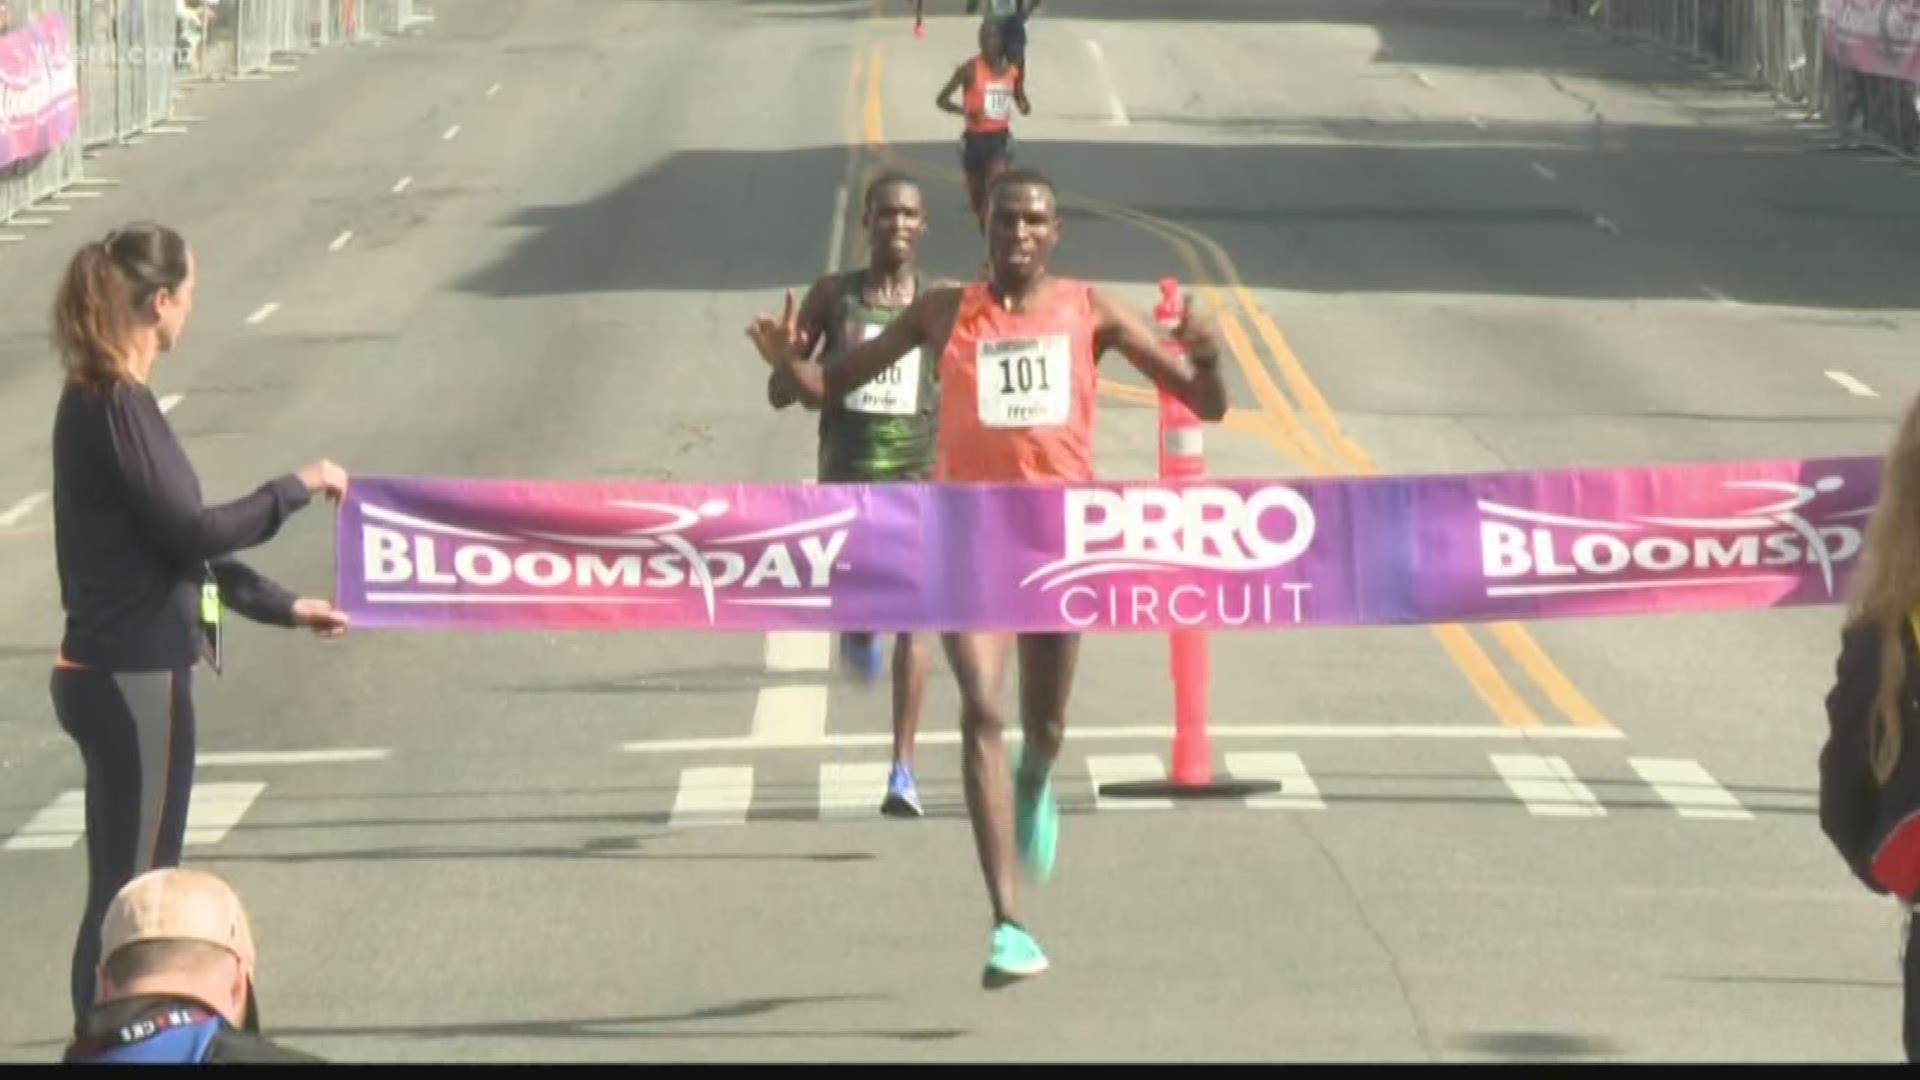 KREM Sports Reporter Mike Boyle caught up with the winners of the elite races at Bloomsday 2019.